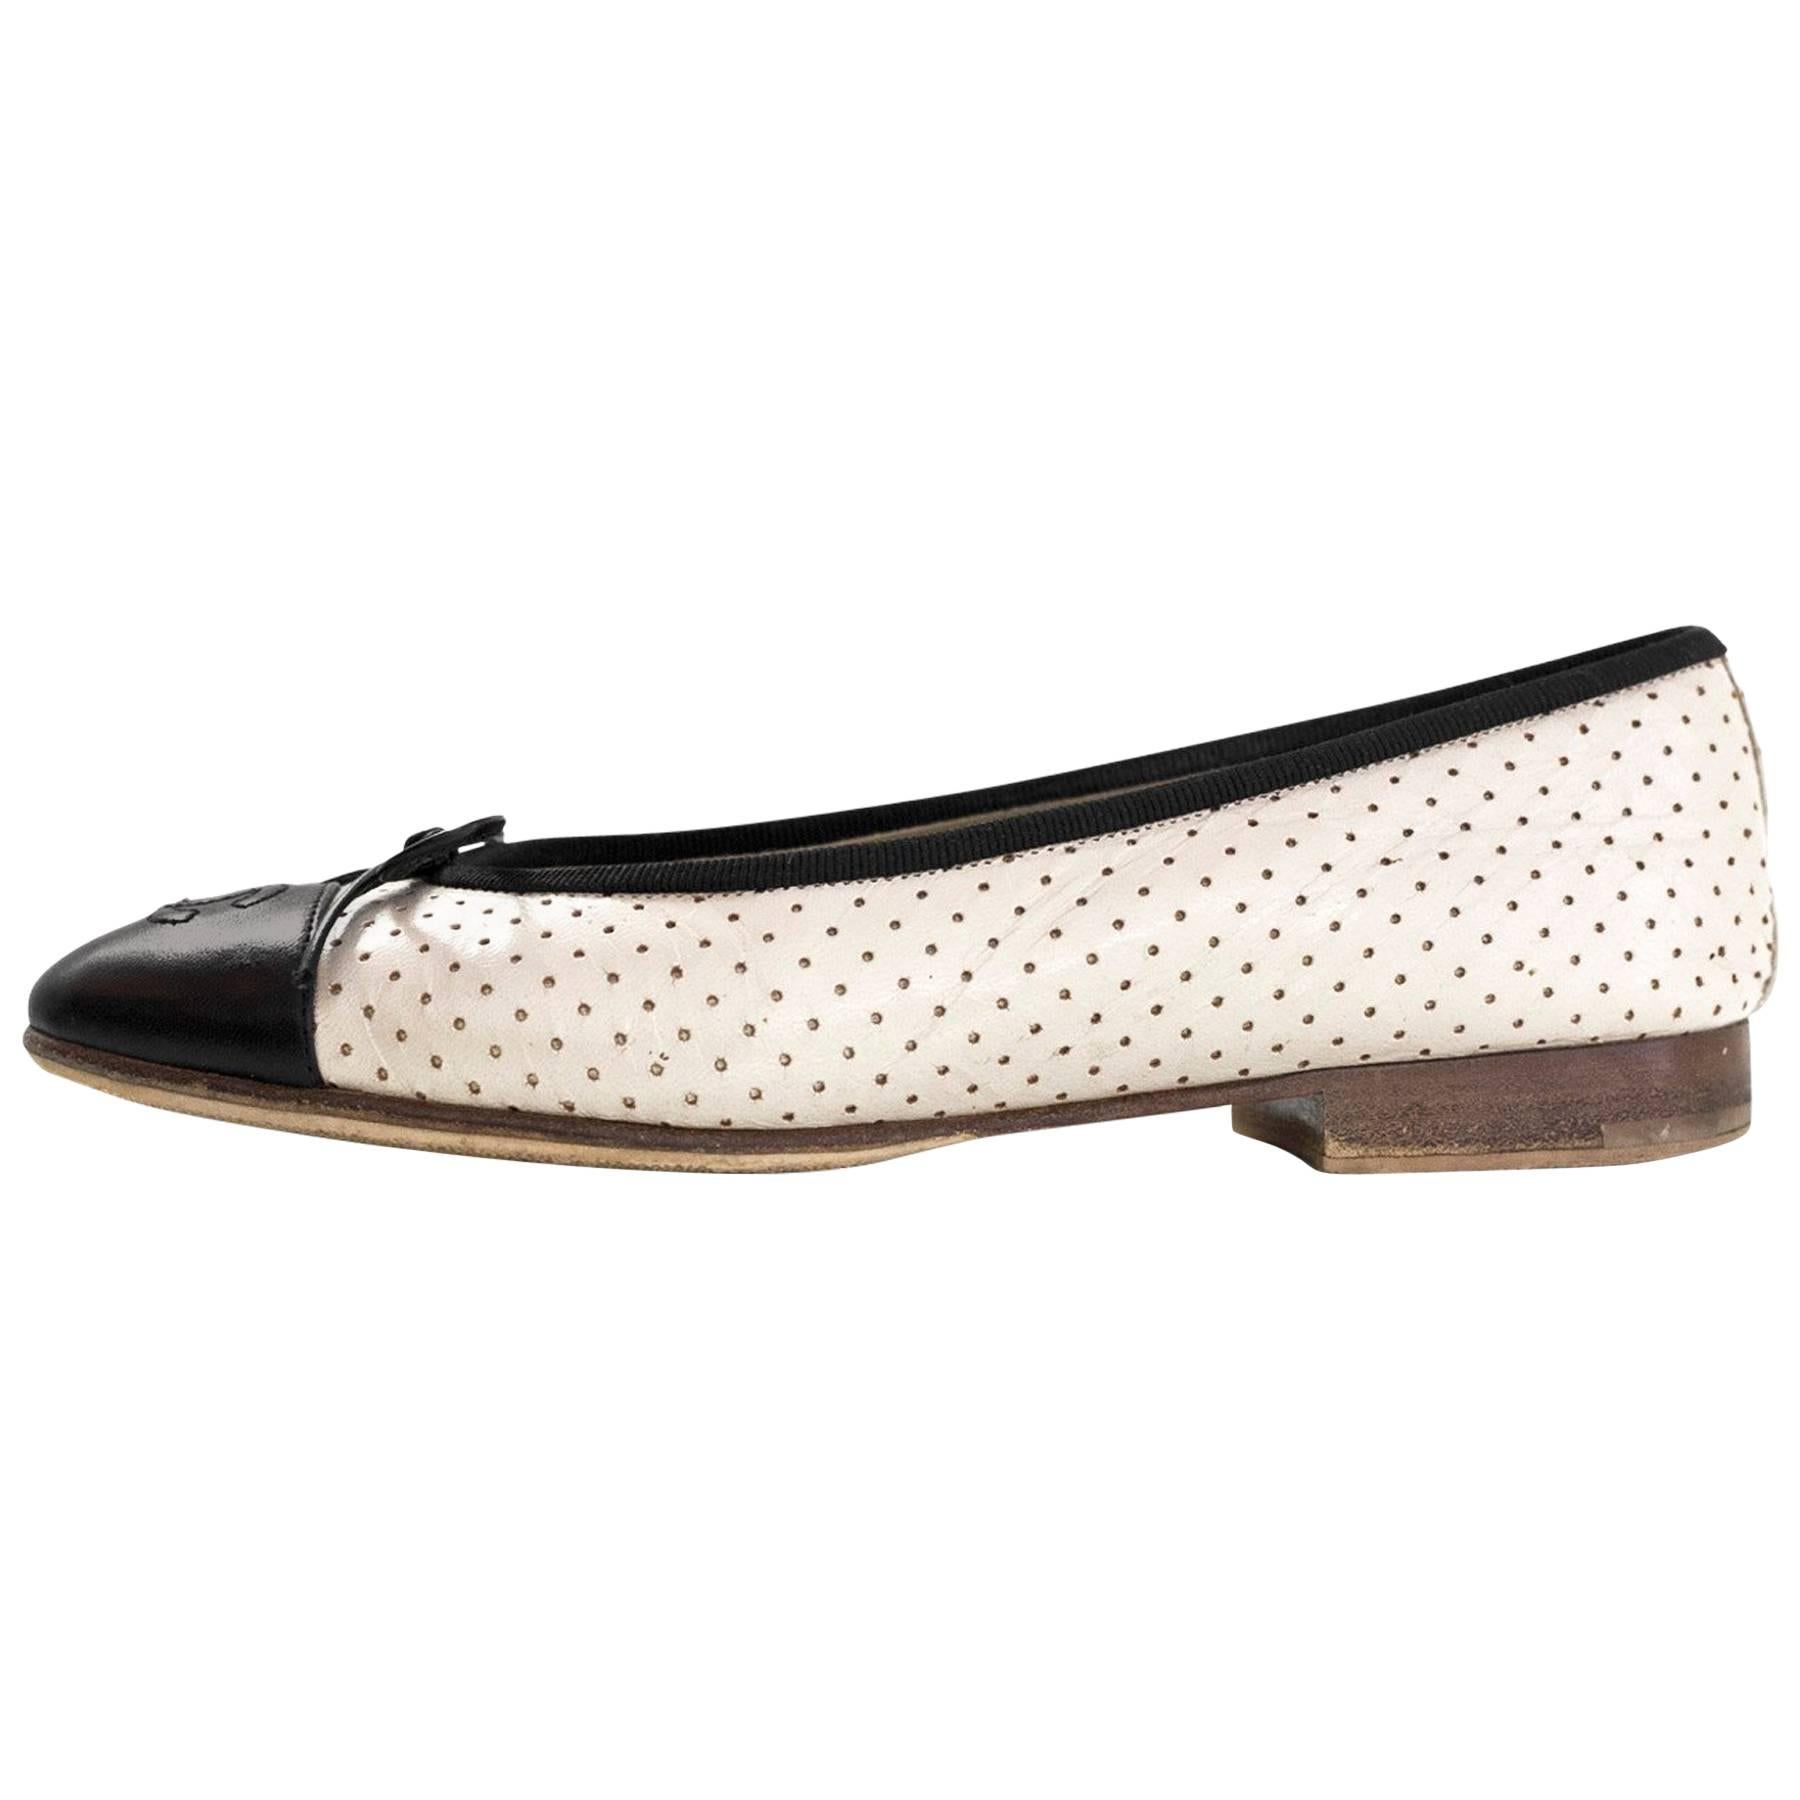 Chanel Beige & Black Perforated Ballet Flats Sz 36 with Box